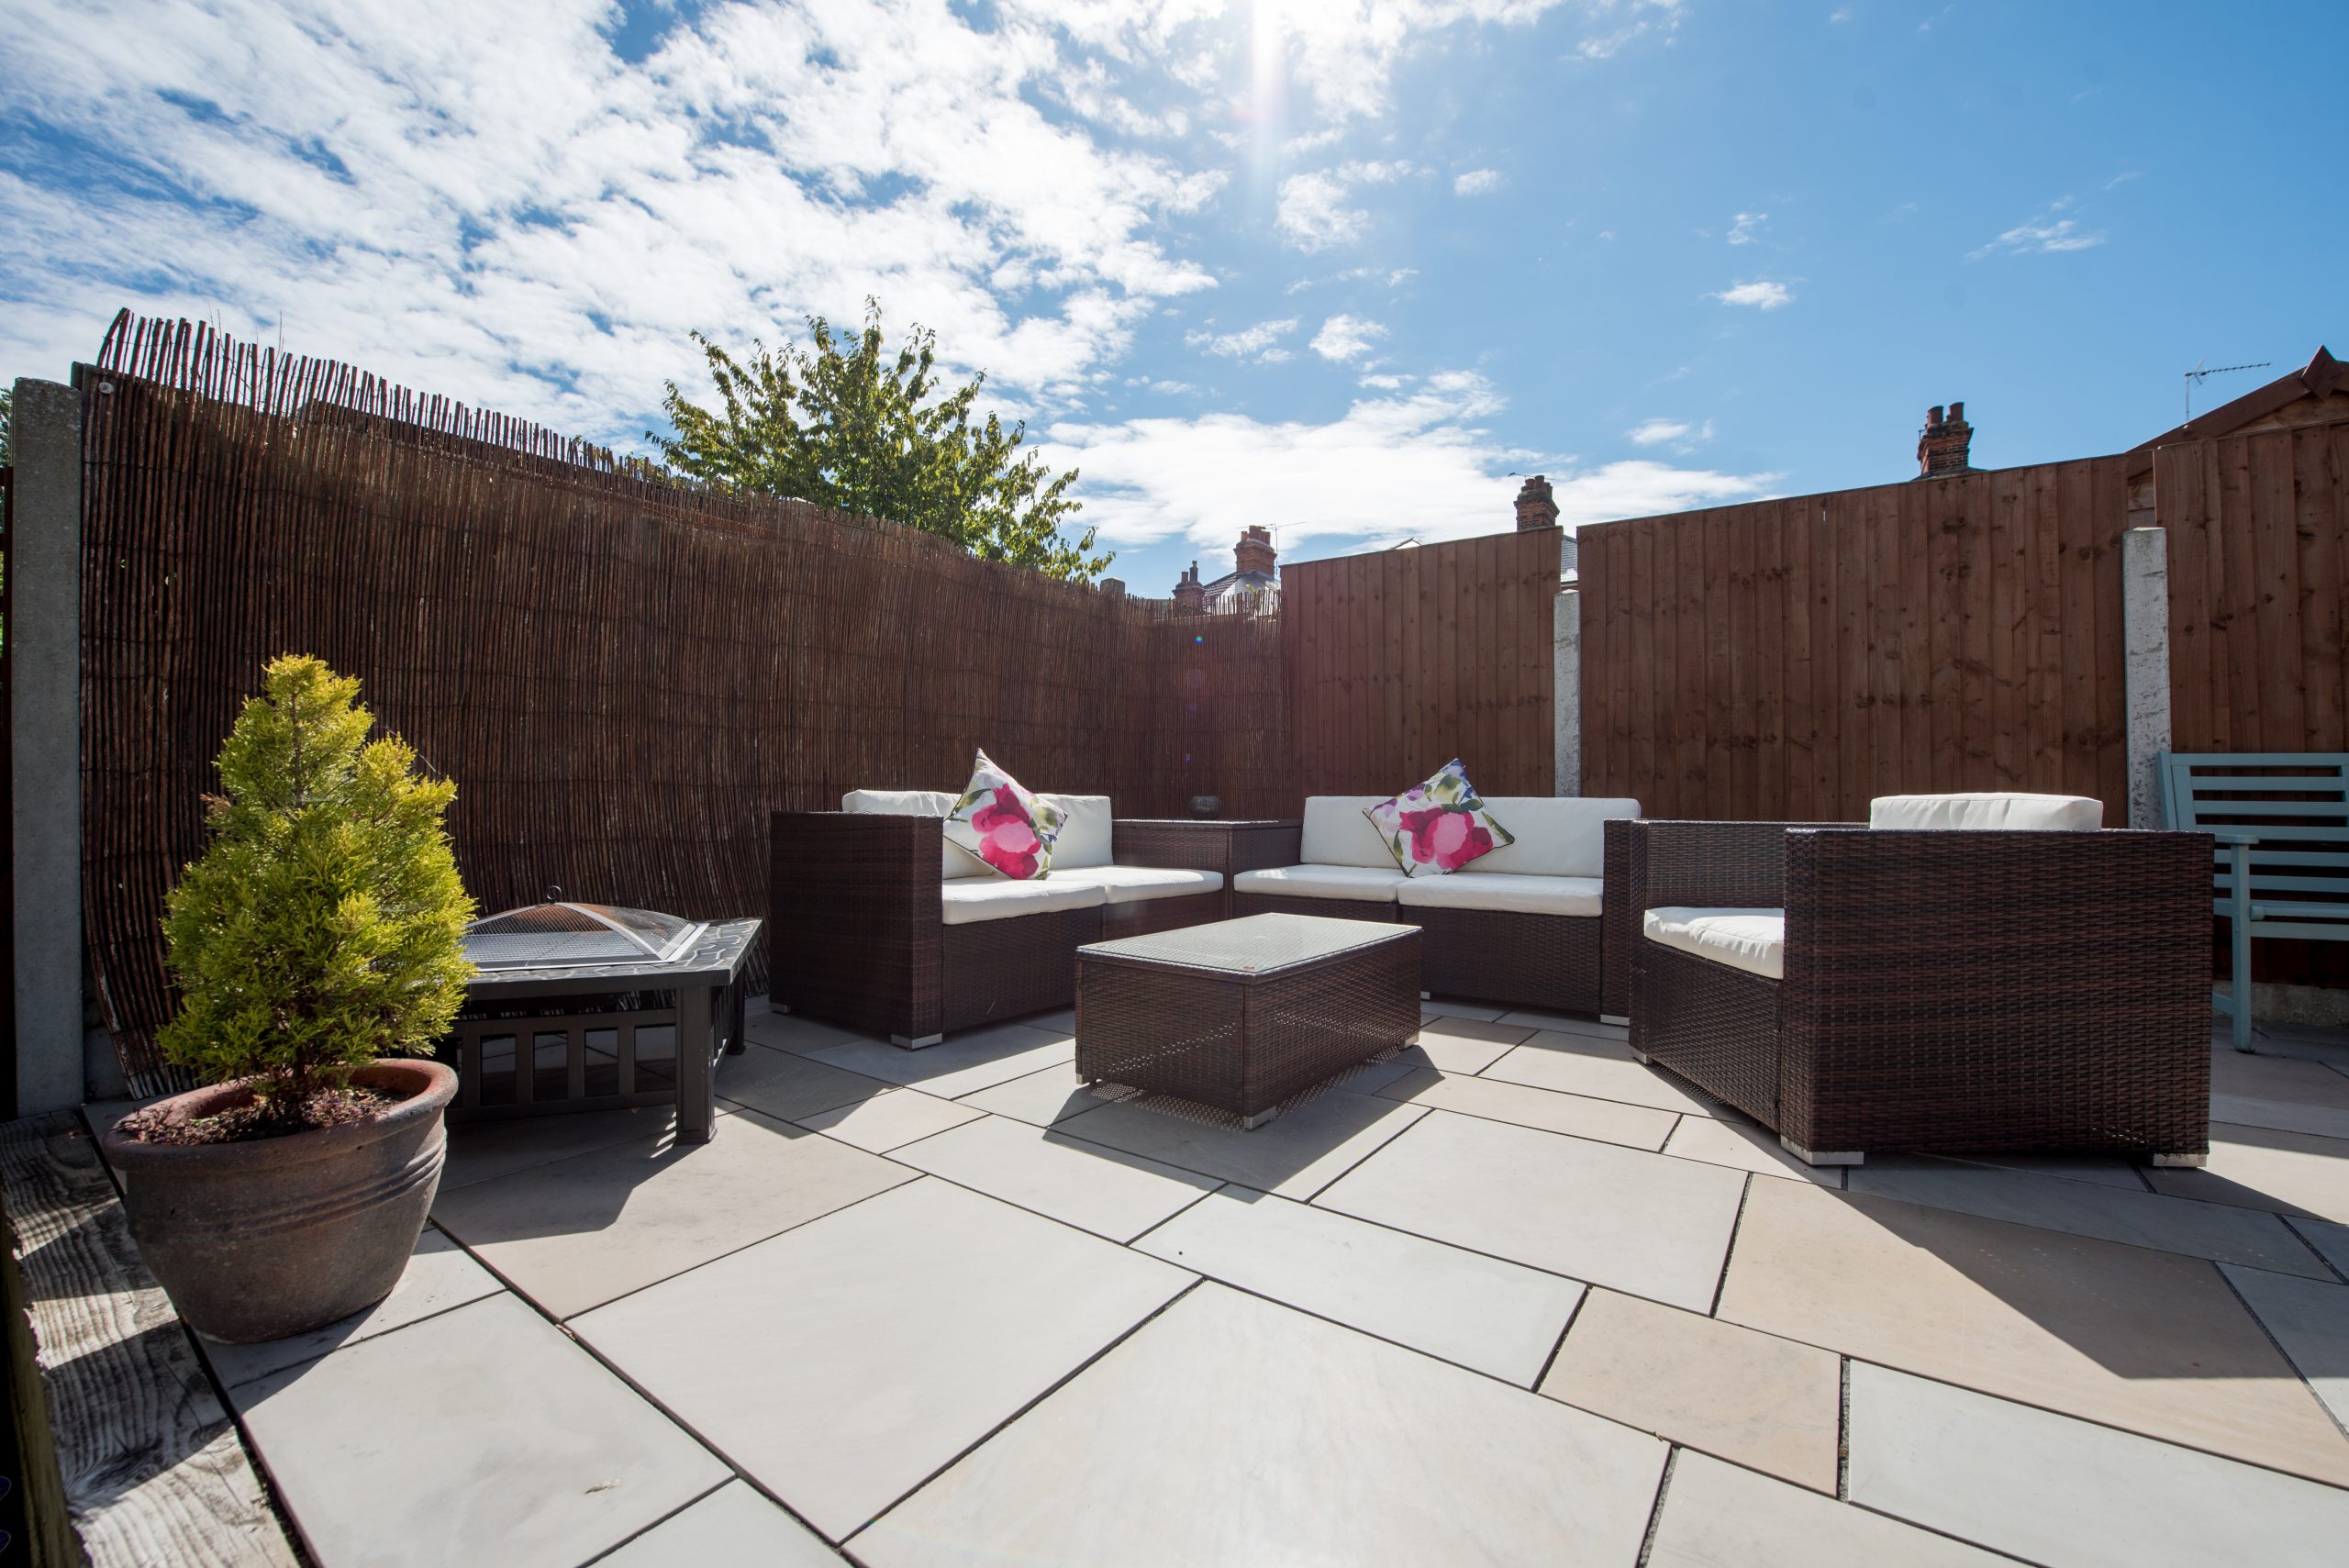 Savvy gardeners rave about 80p trick that banishes black spots from patios & there’s no need to use a pressure washer